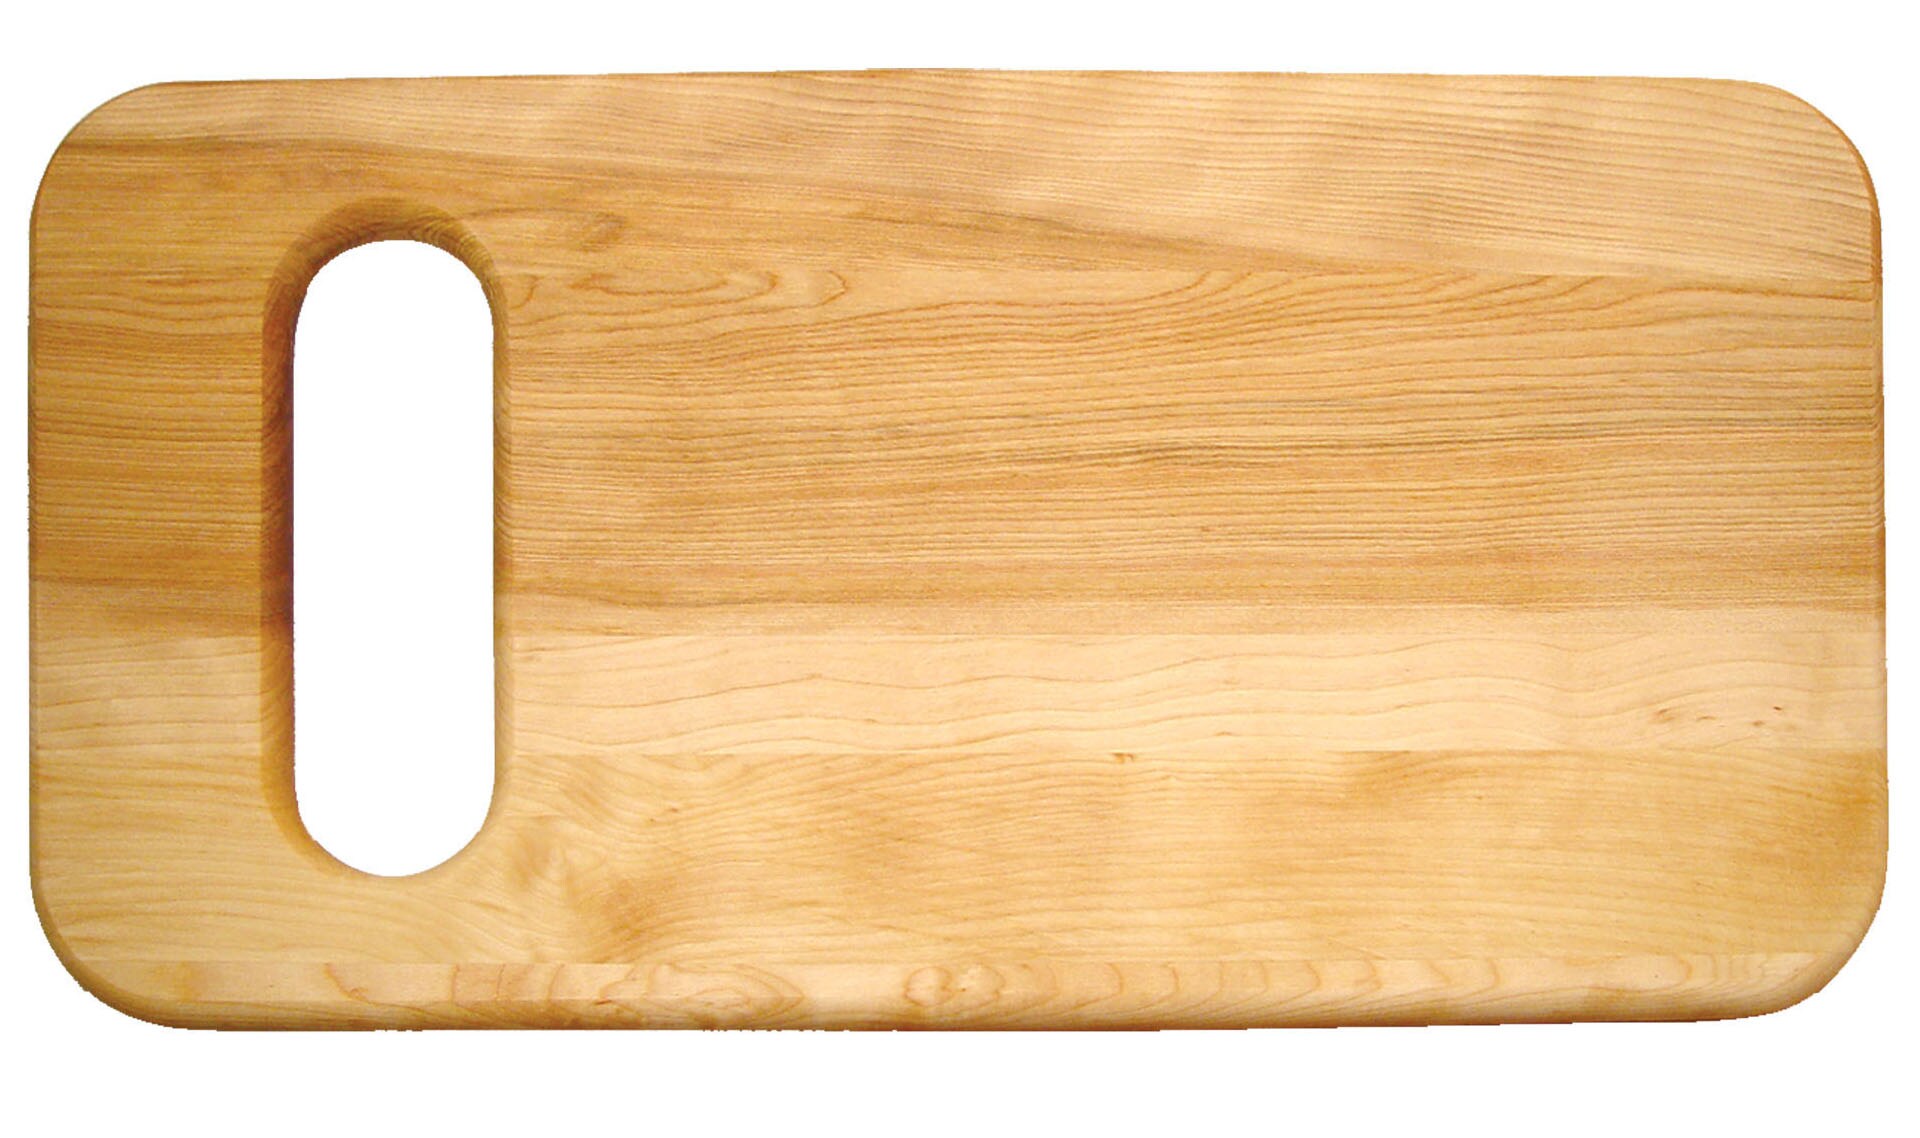 Zwilling Accessories Cutting Board Bamboo, Large